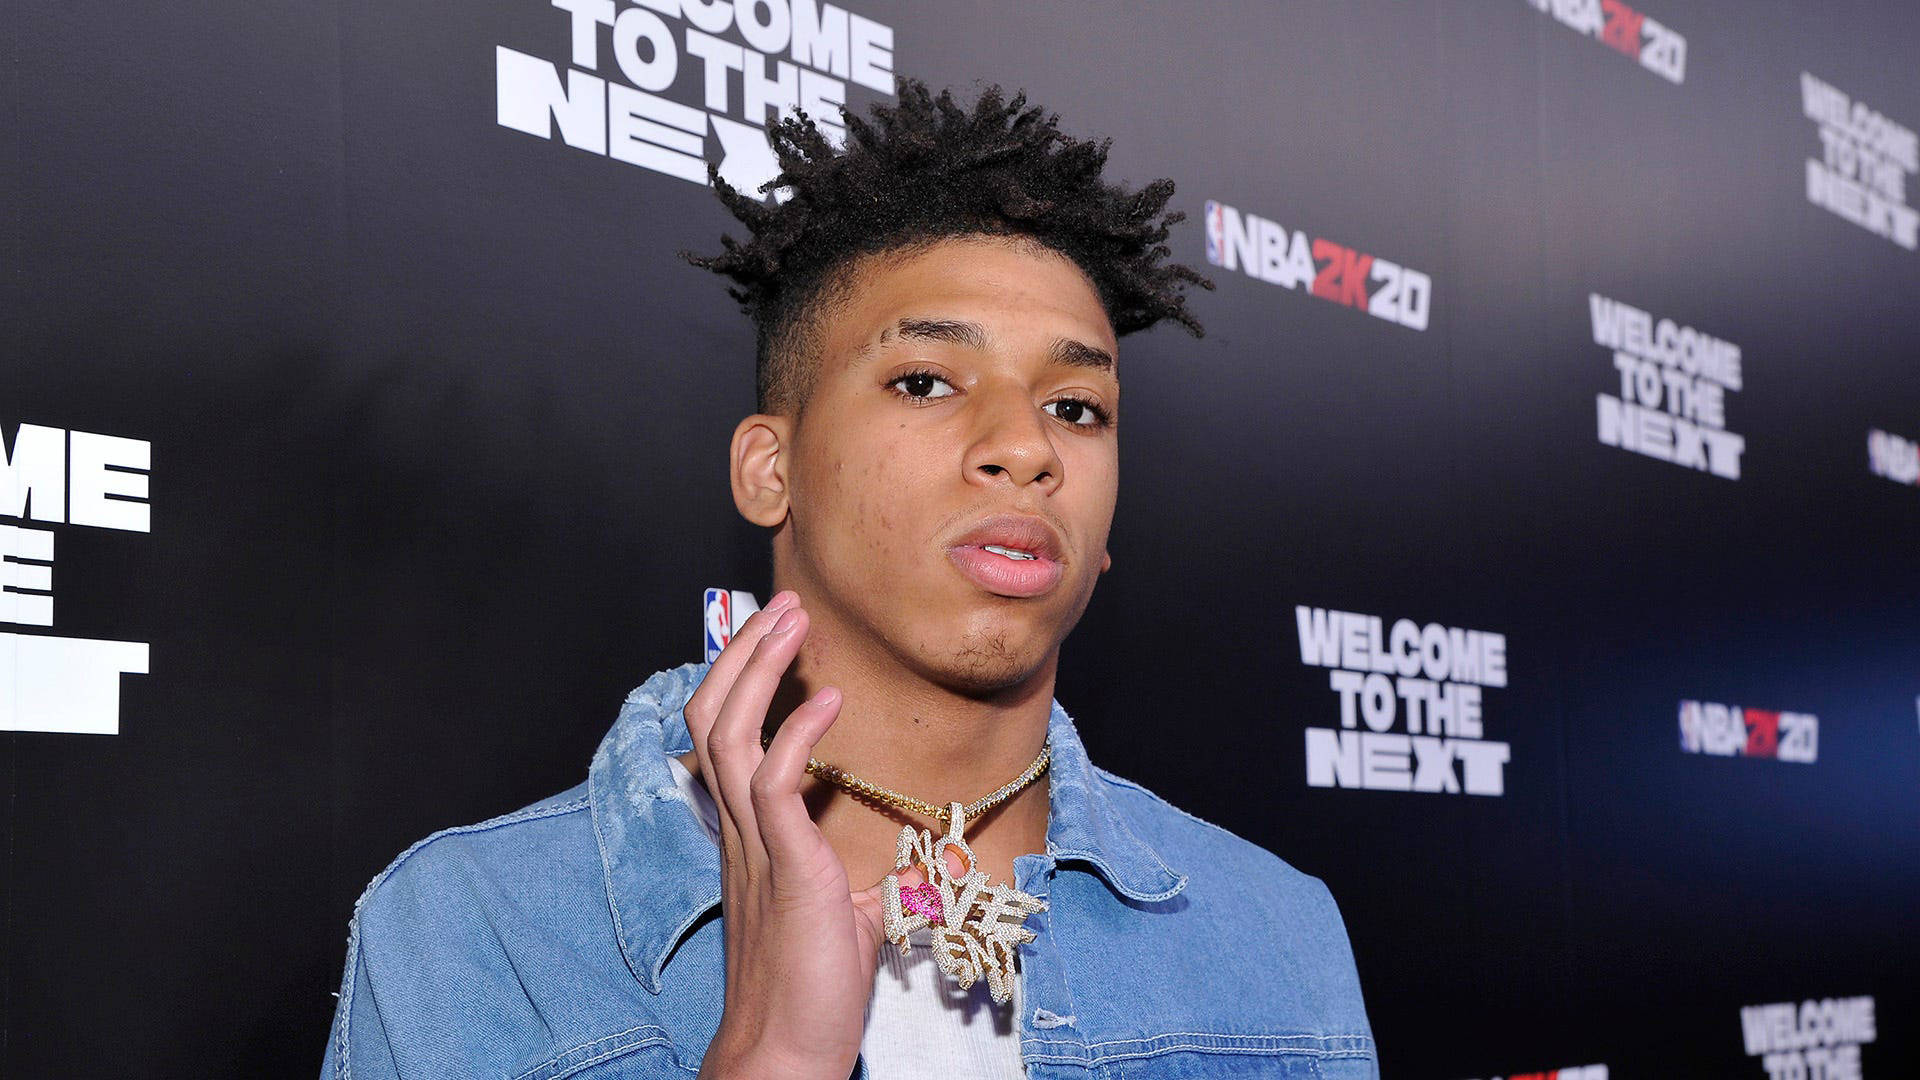 Nle Choppa At A Nba 2k2d Press Conference Background